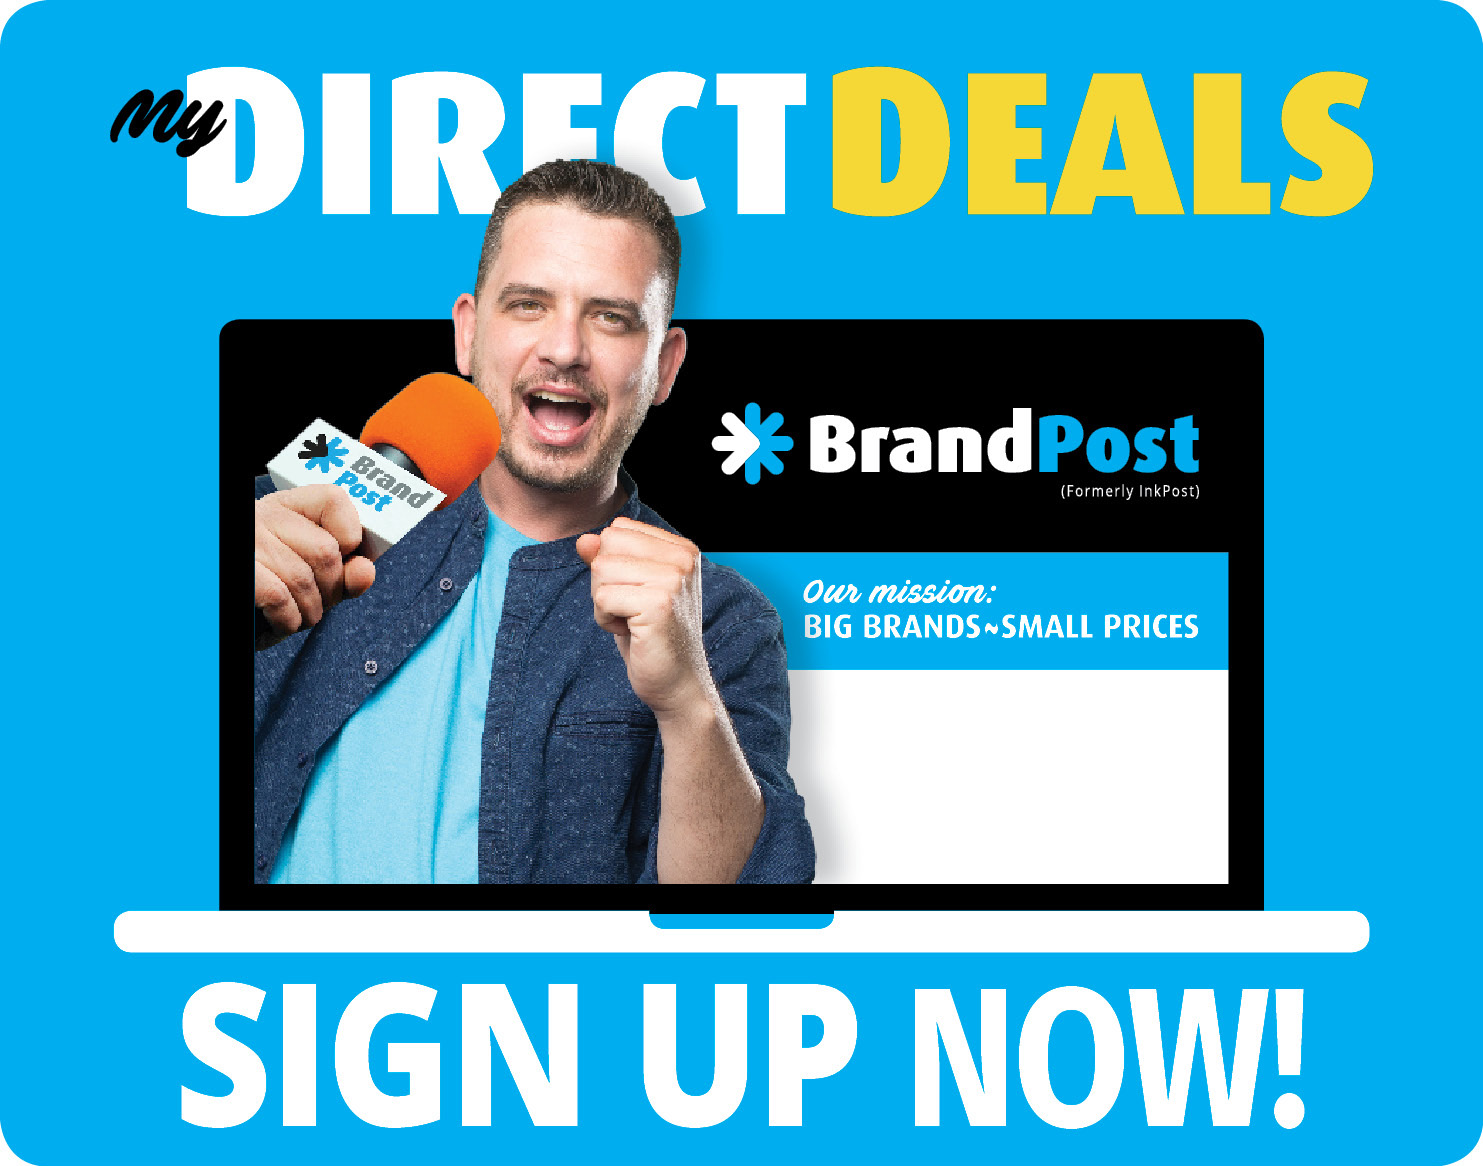 My Direct Deals - Sign up now